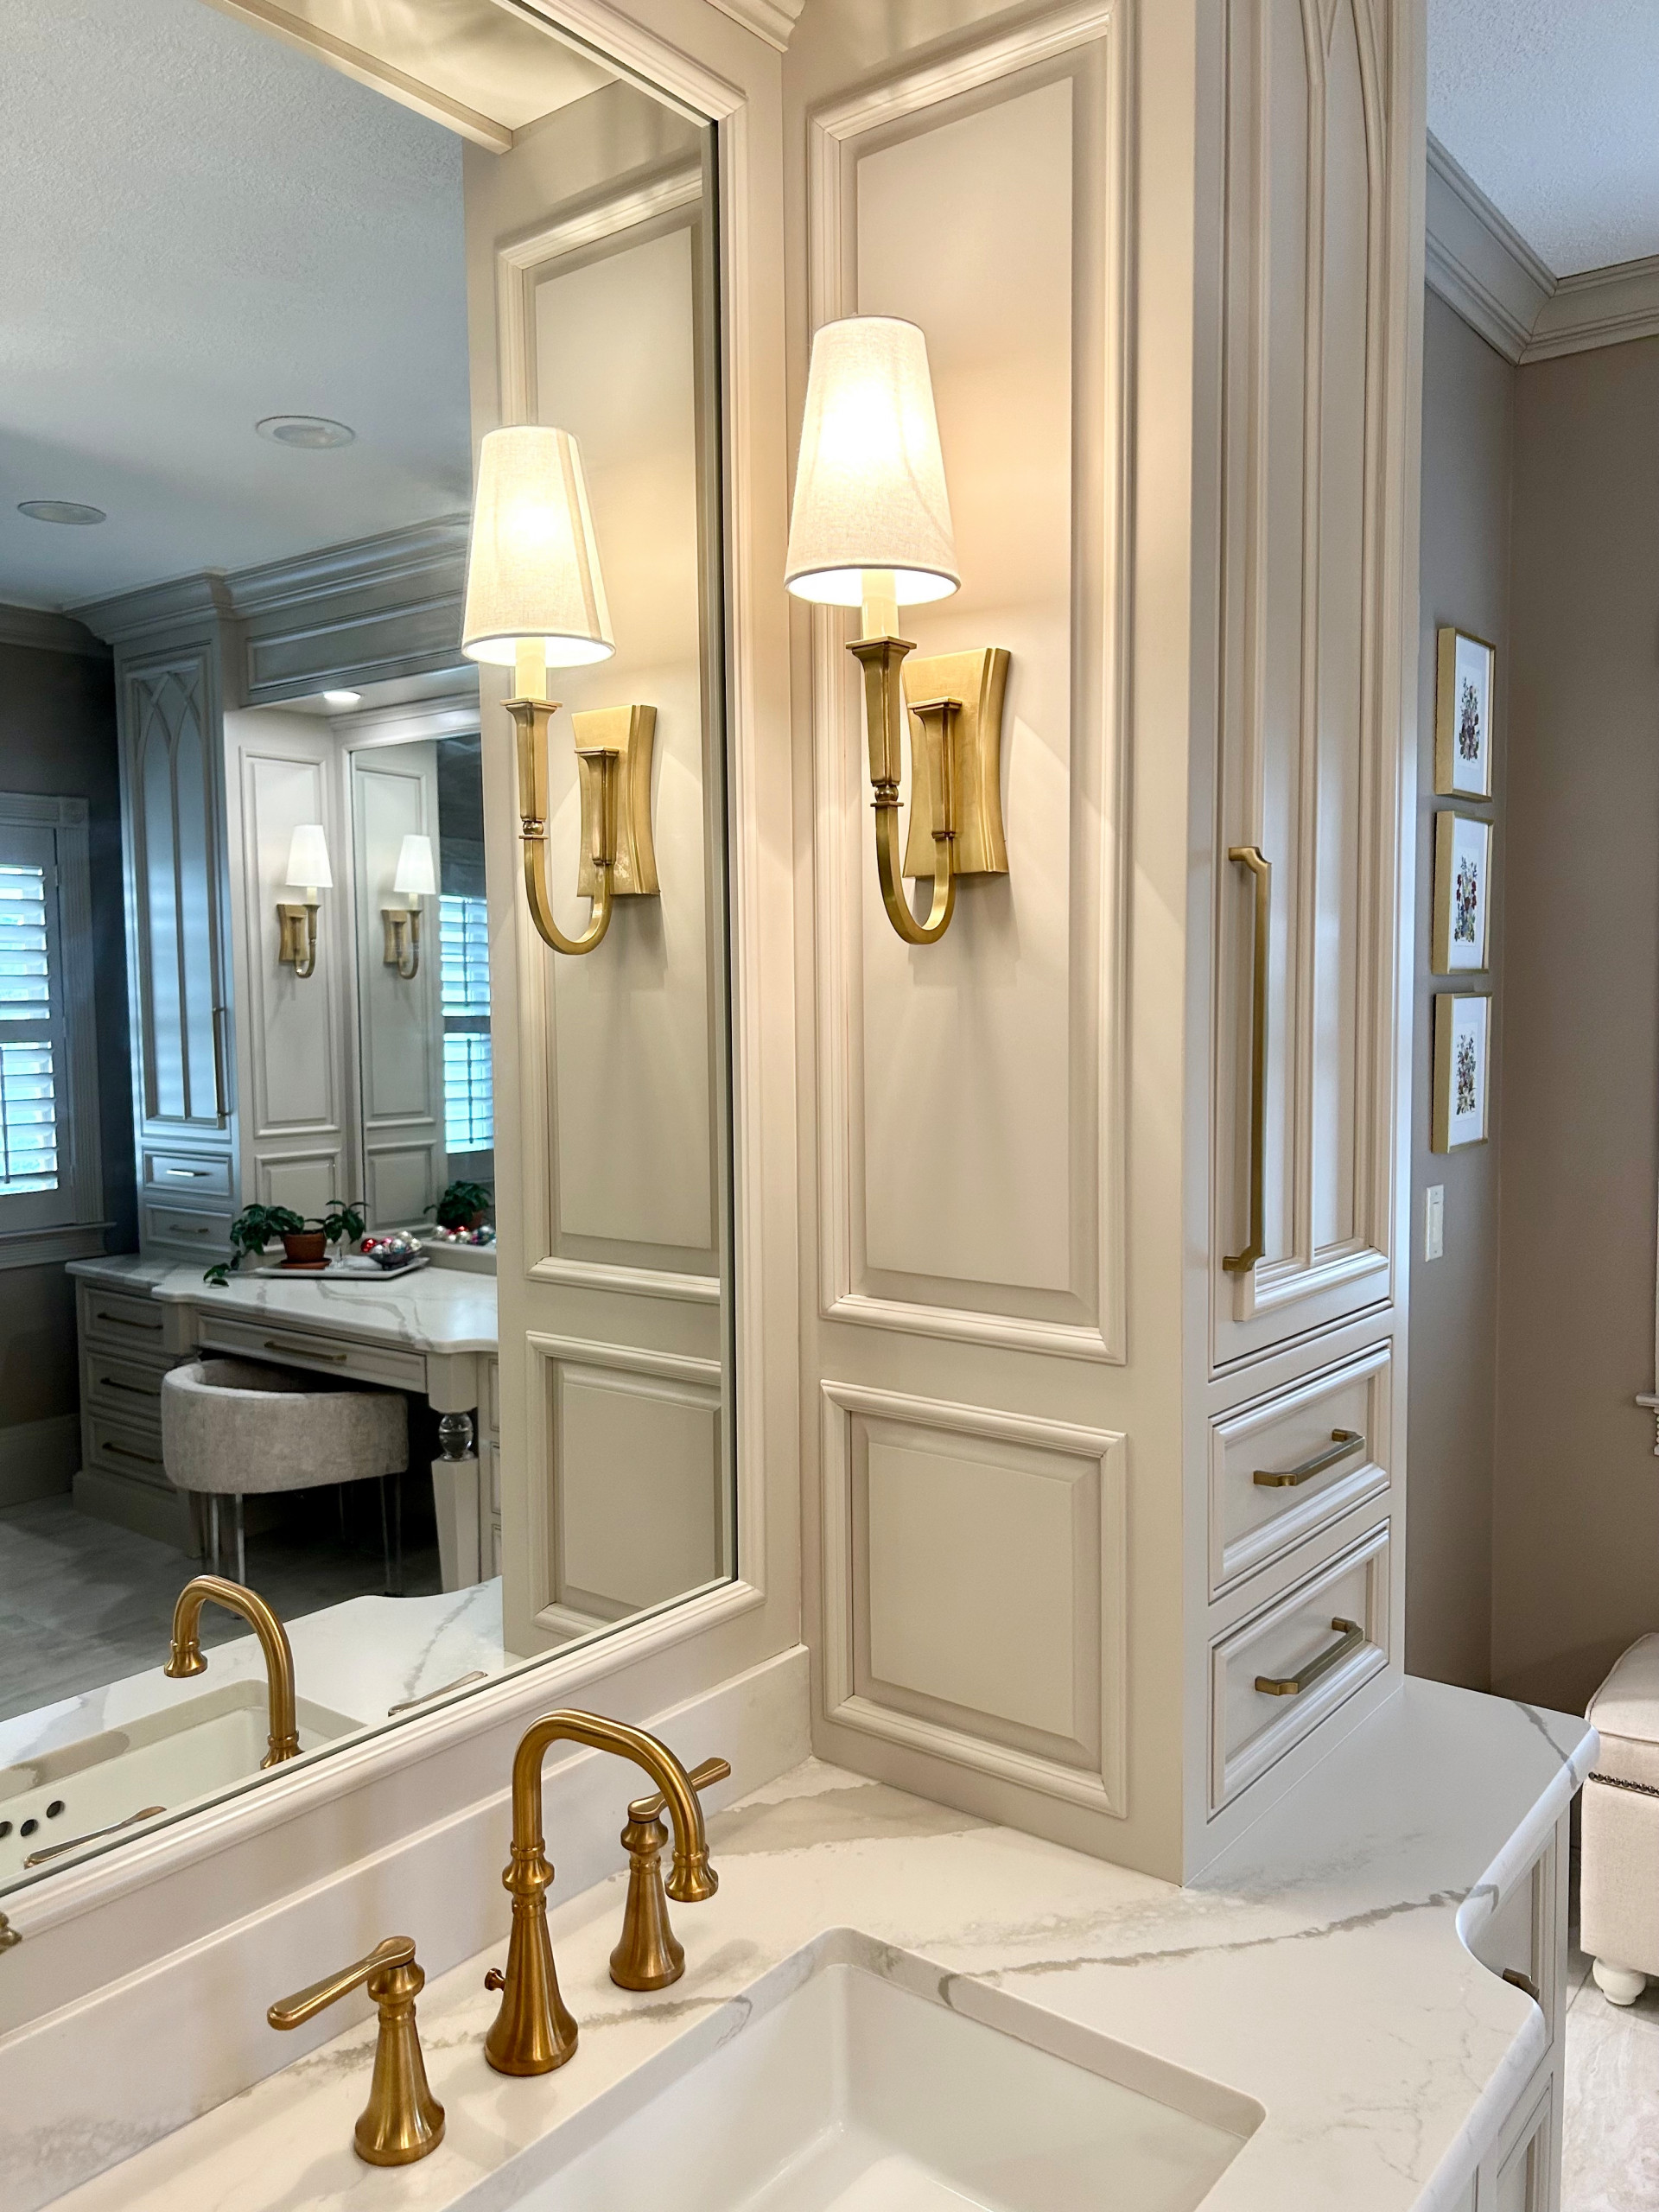 UNDERMOUNT SINKS AND INTEGRATED VANITY TOWERS WITH POWER AND SCONCES